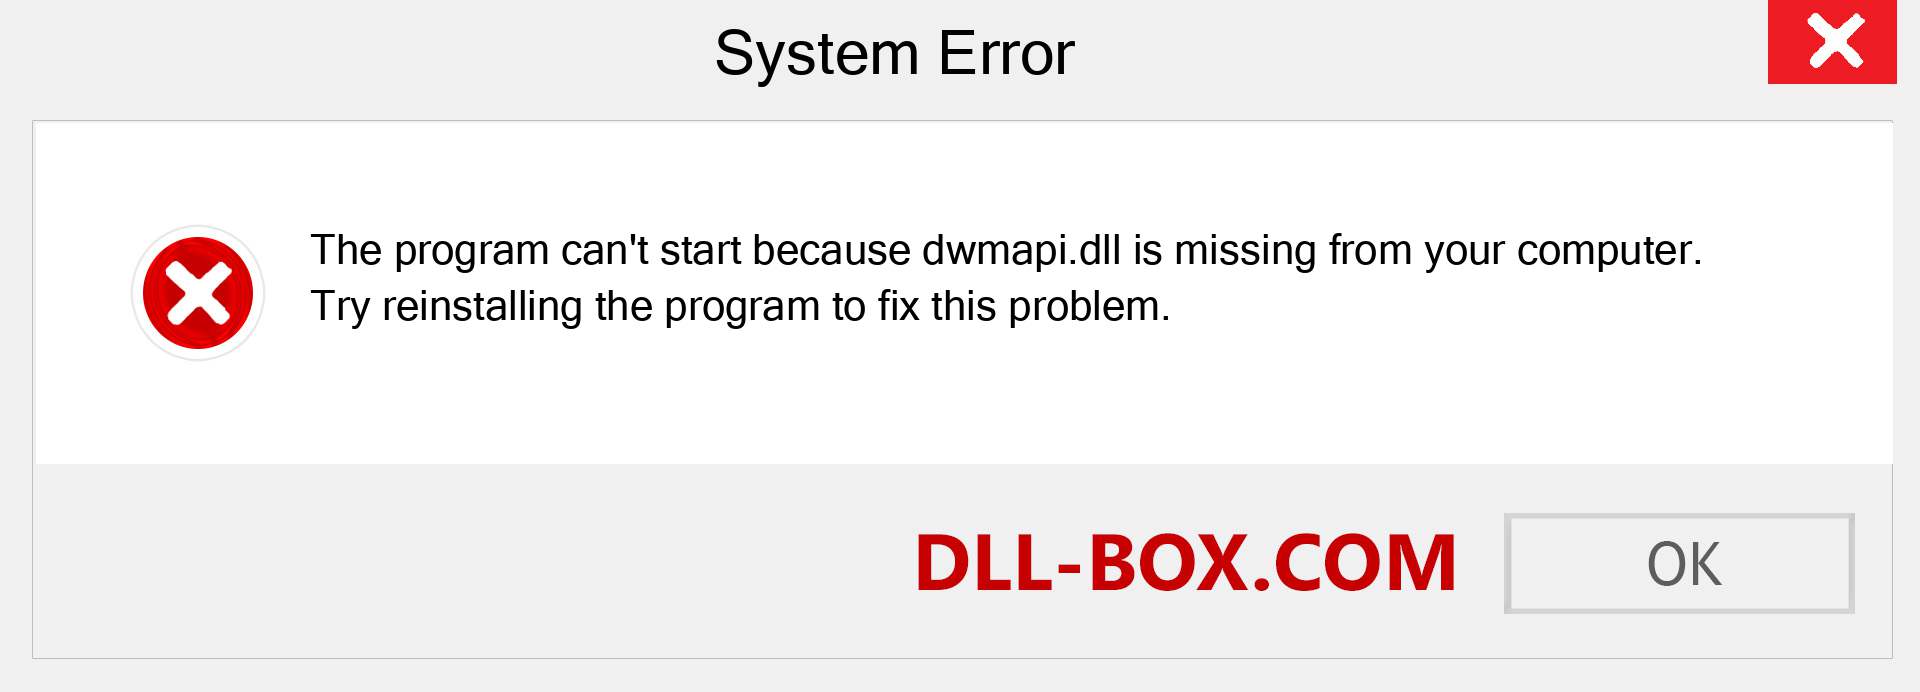  dwmapi.dll file is missing?. Download for Windows 7, 8, 10 - Fix  dwmapi dll Missing Error on Windows, photos, images